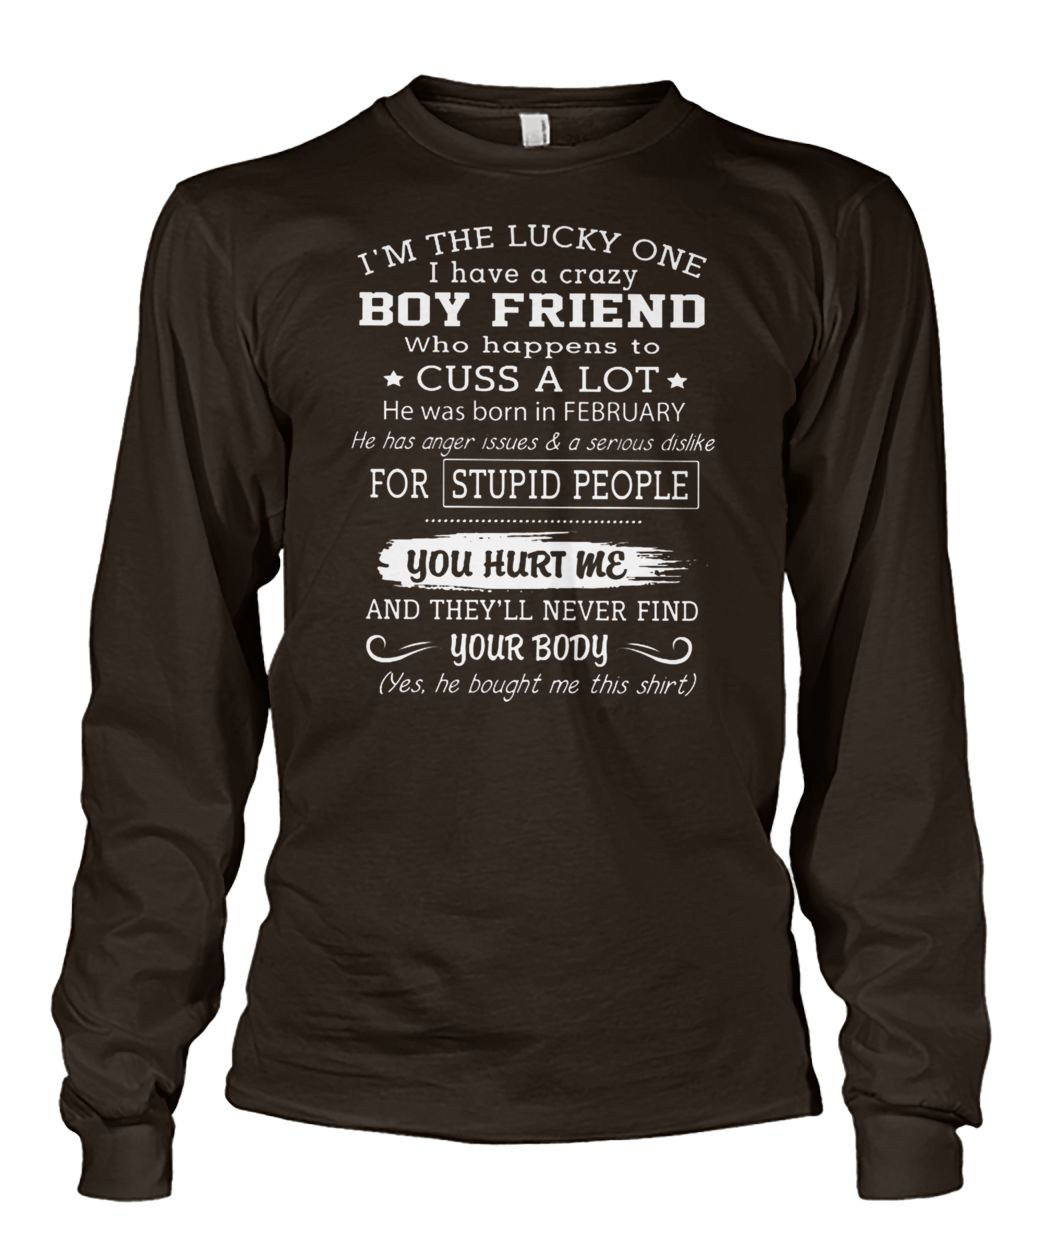 I'm the luck one who have a crazy boy friend who happens to cuss a lot unisex long sleeve